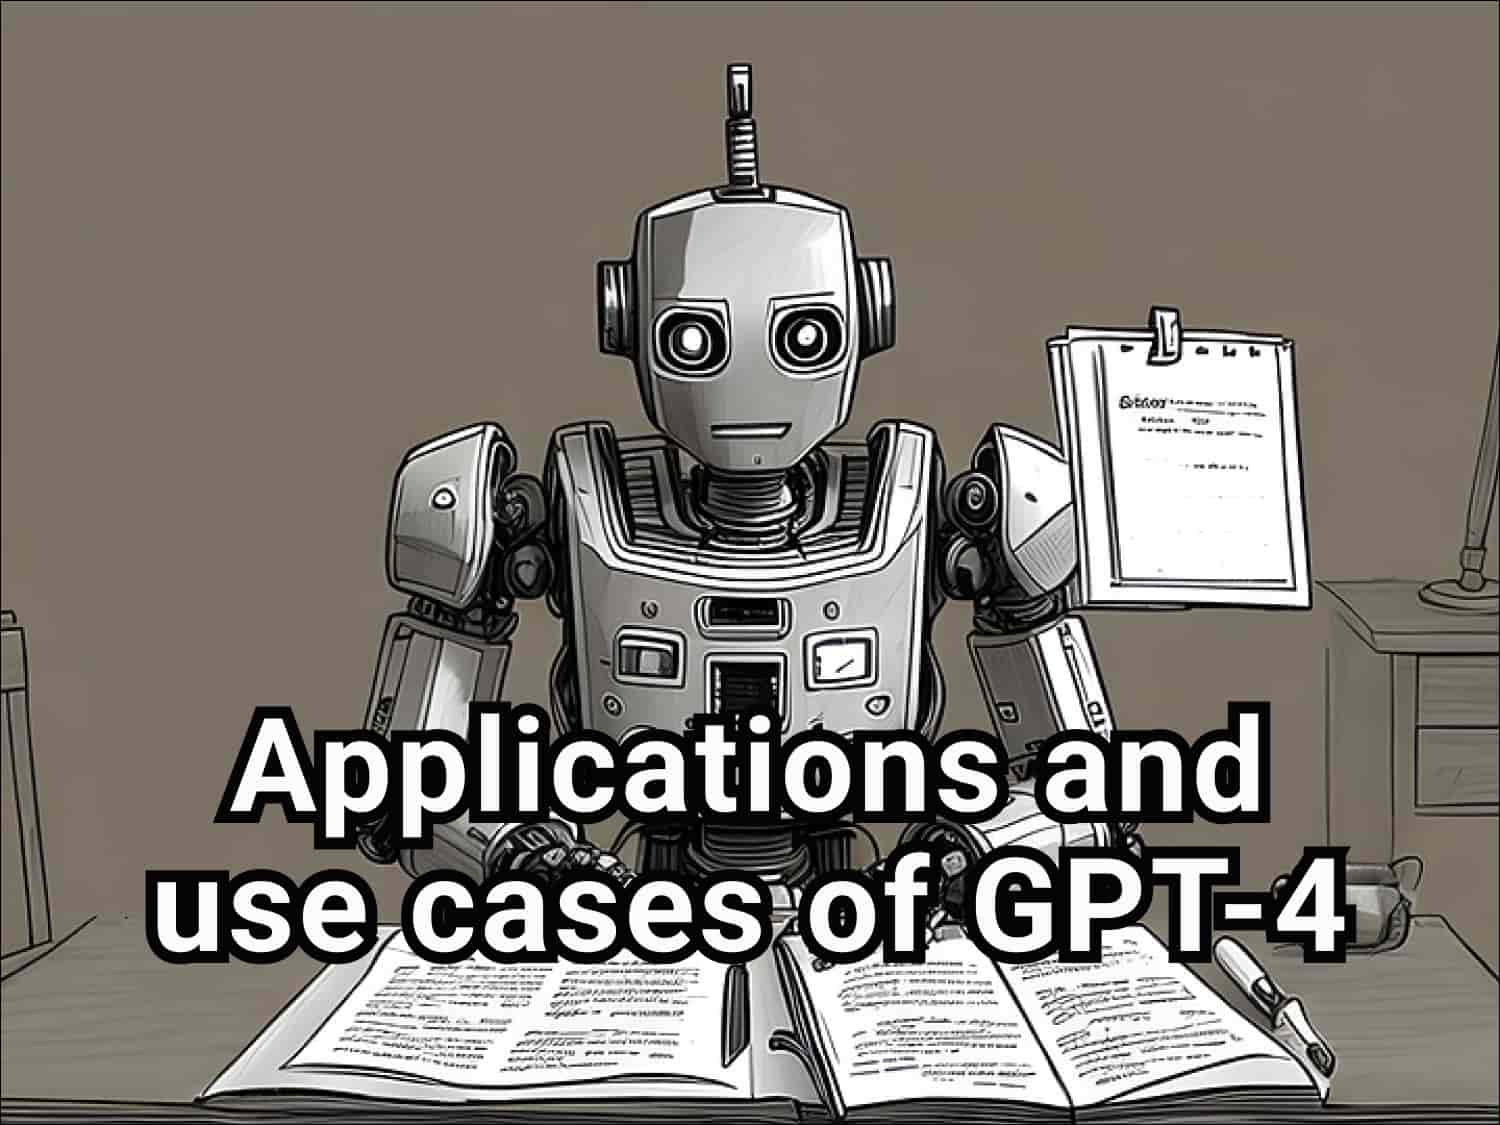 What can GPT-4 do? Use cases of GPT-4